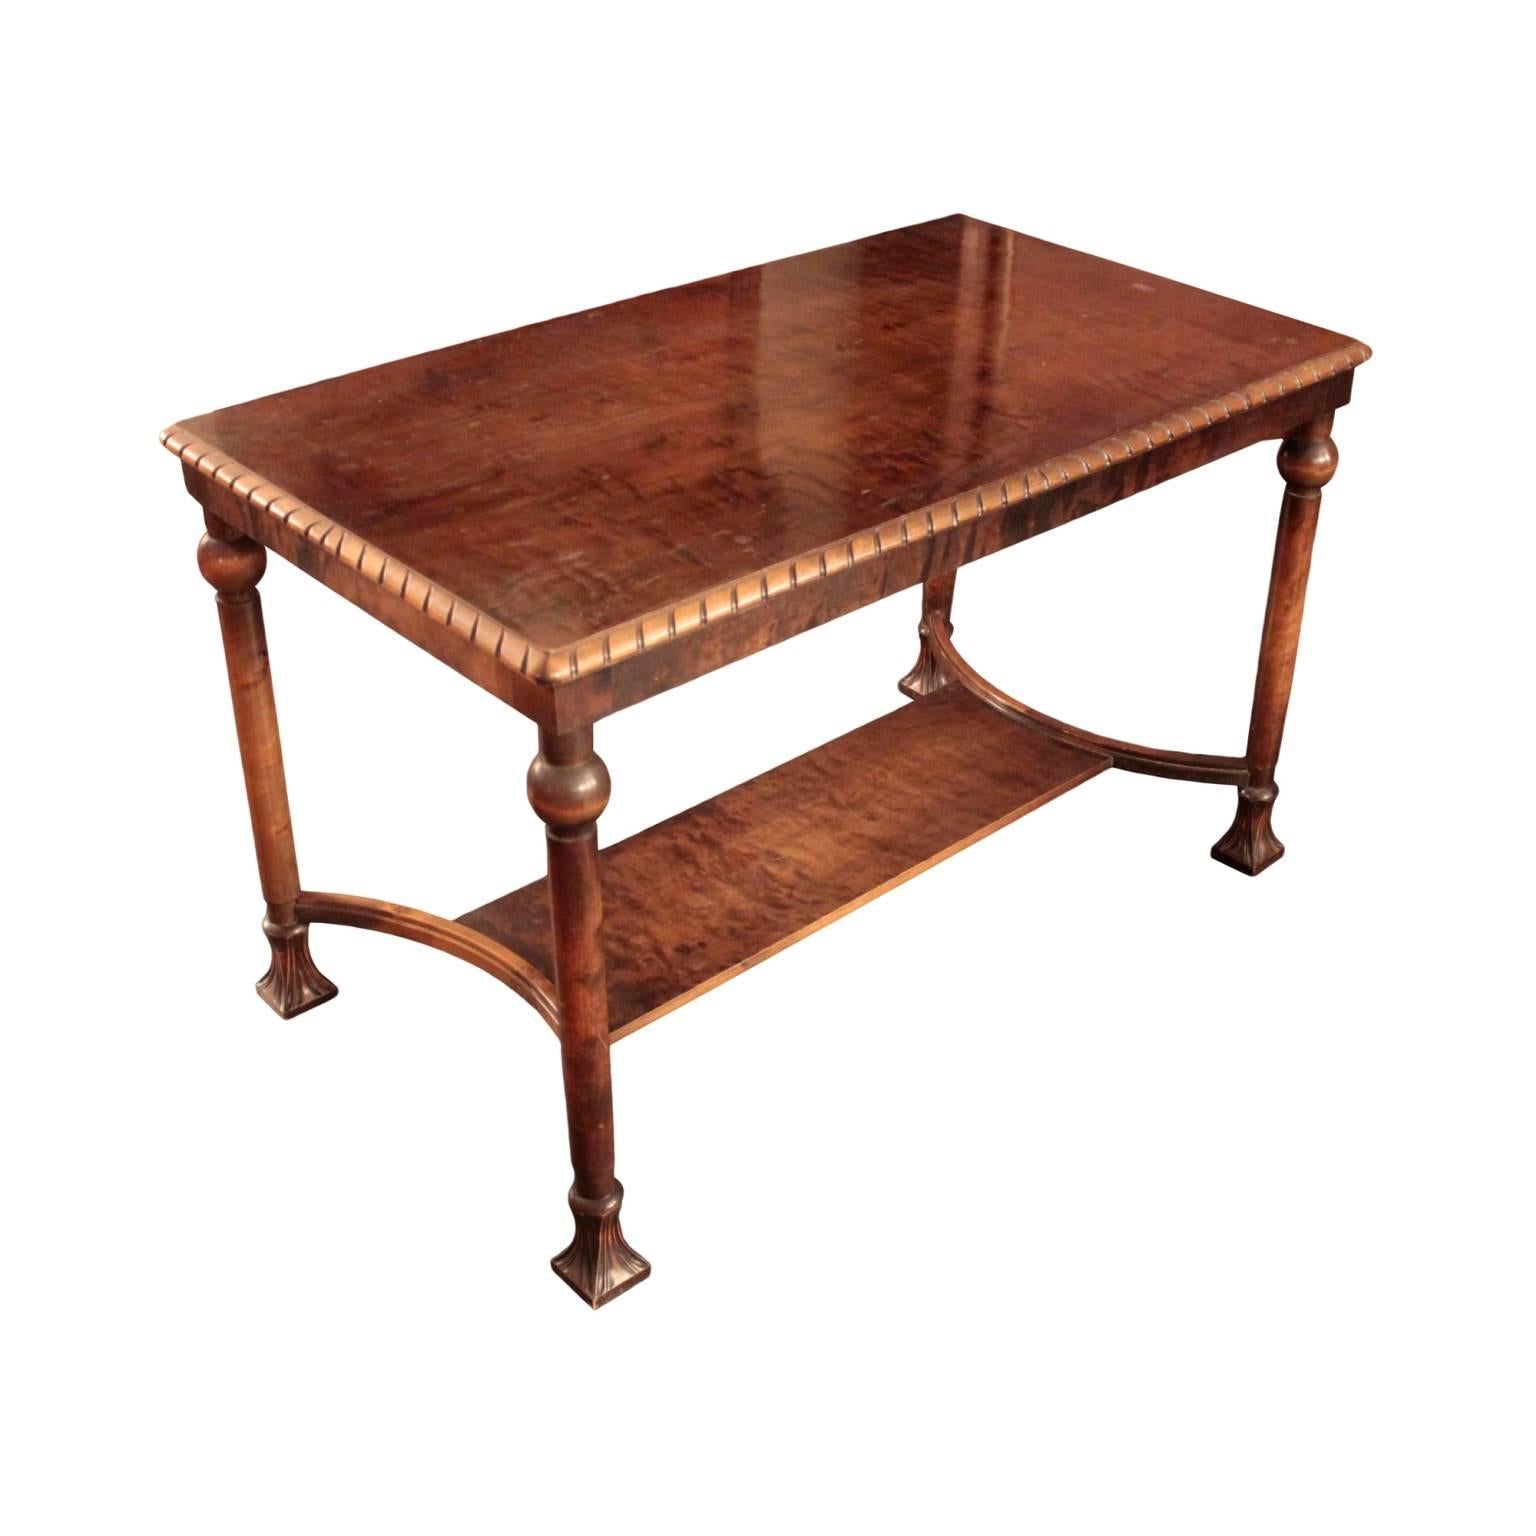 Full professional restoration is included in the price, please allow 2 weeks. 

Elegant tall cocktail table featuring rectangular top with dentil edge molding raised on four colonette legs with sphere capitals and channelled plinth feet joined by